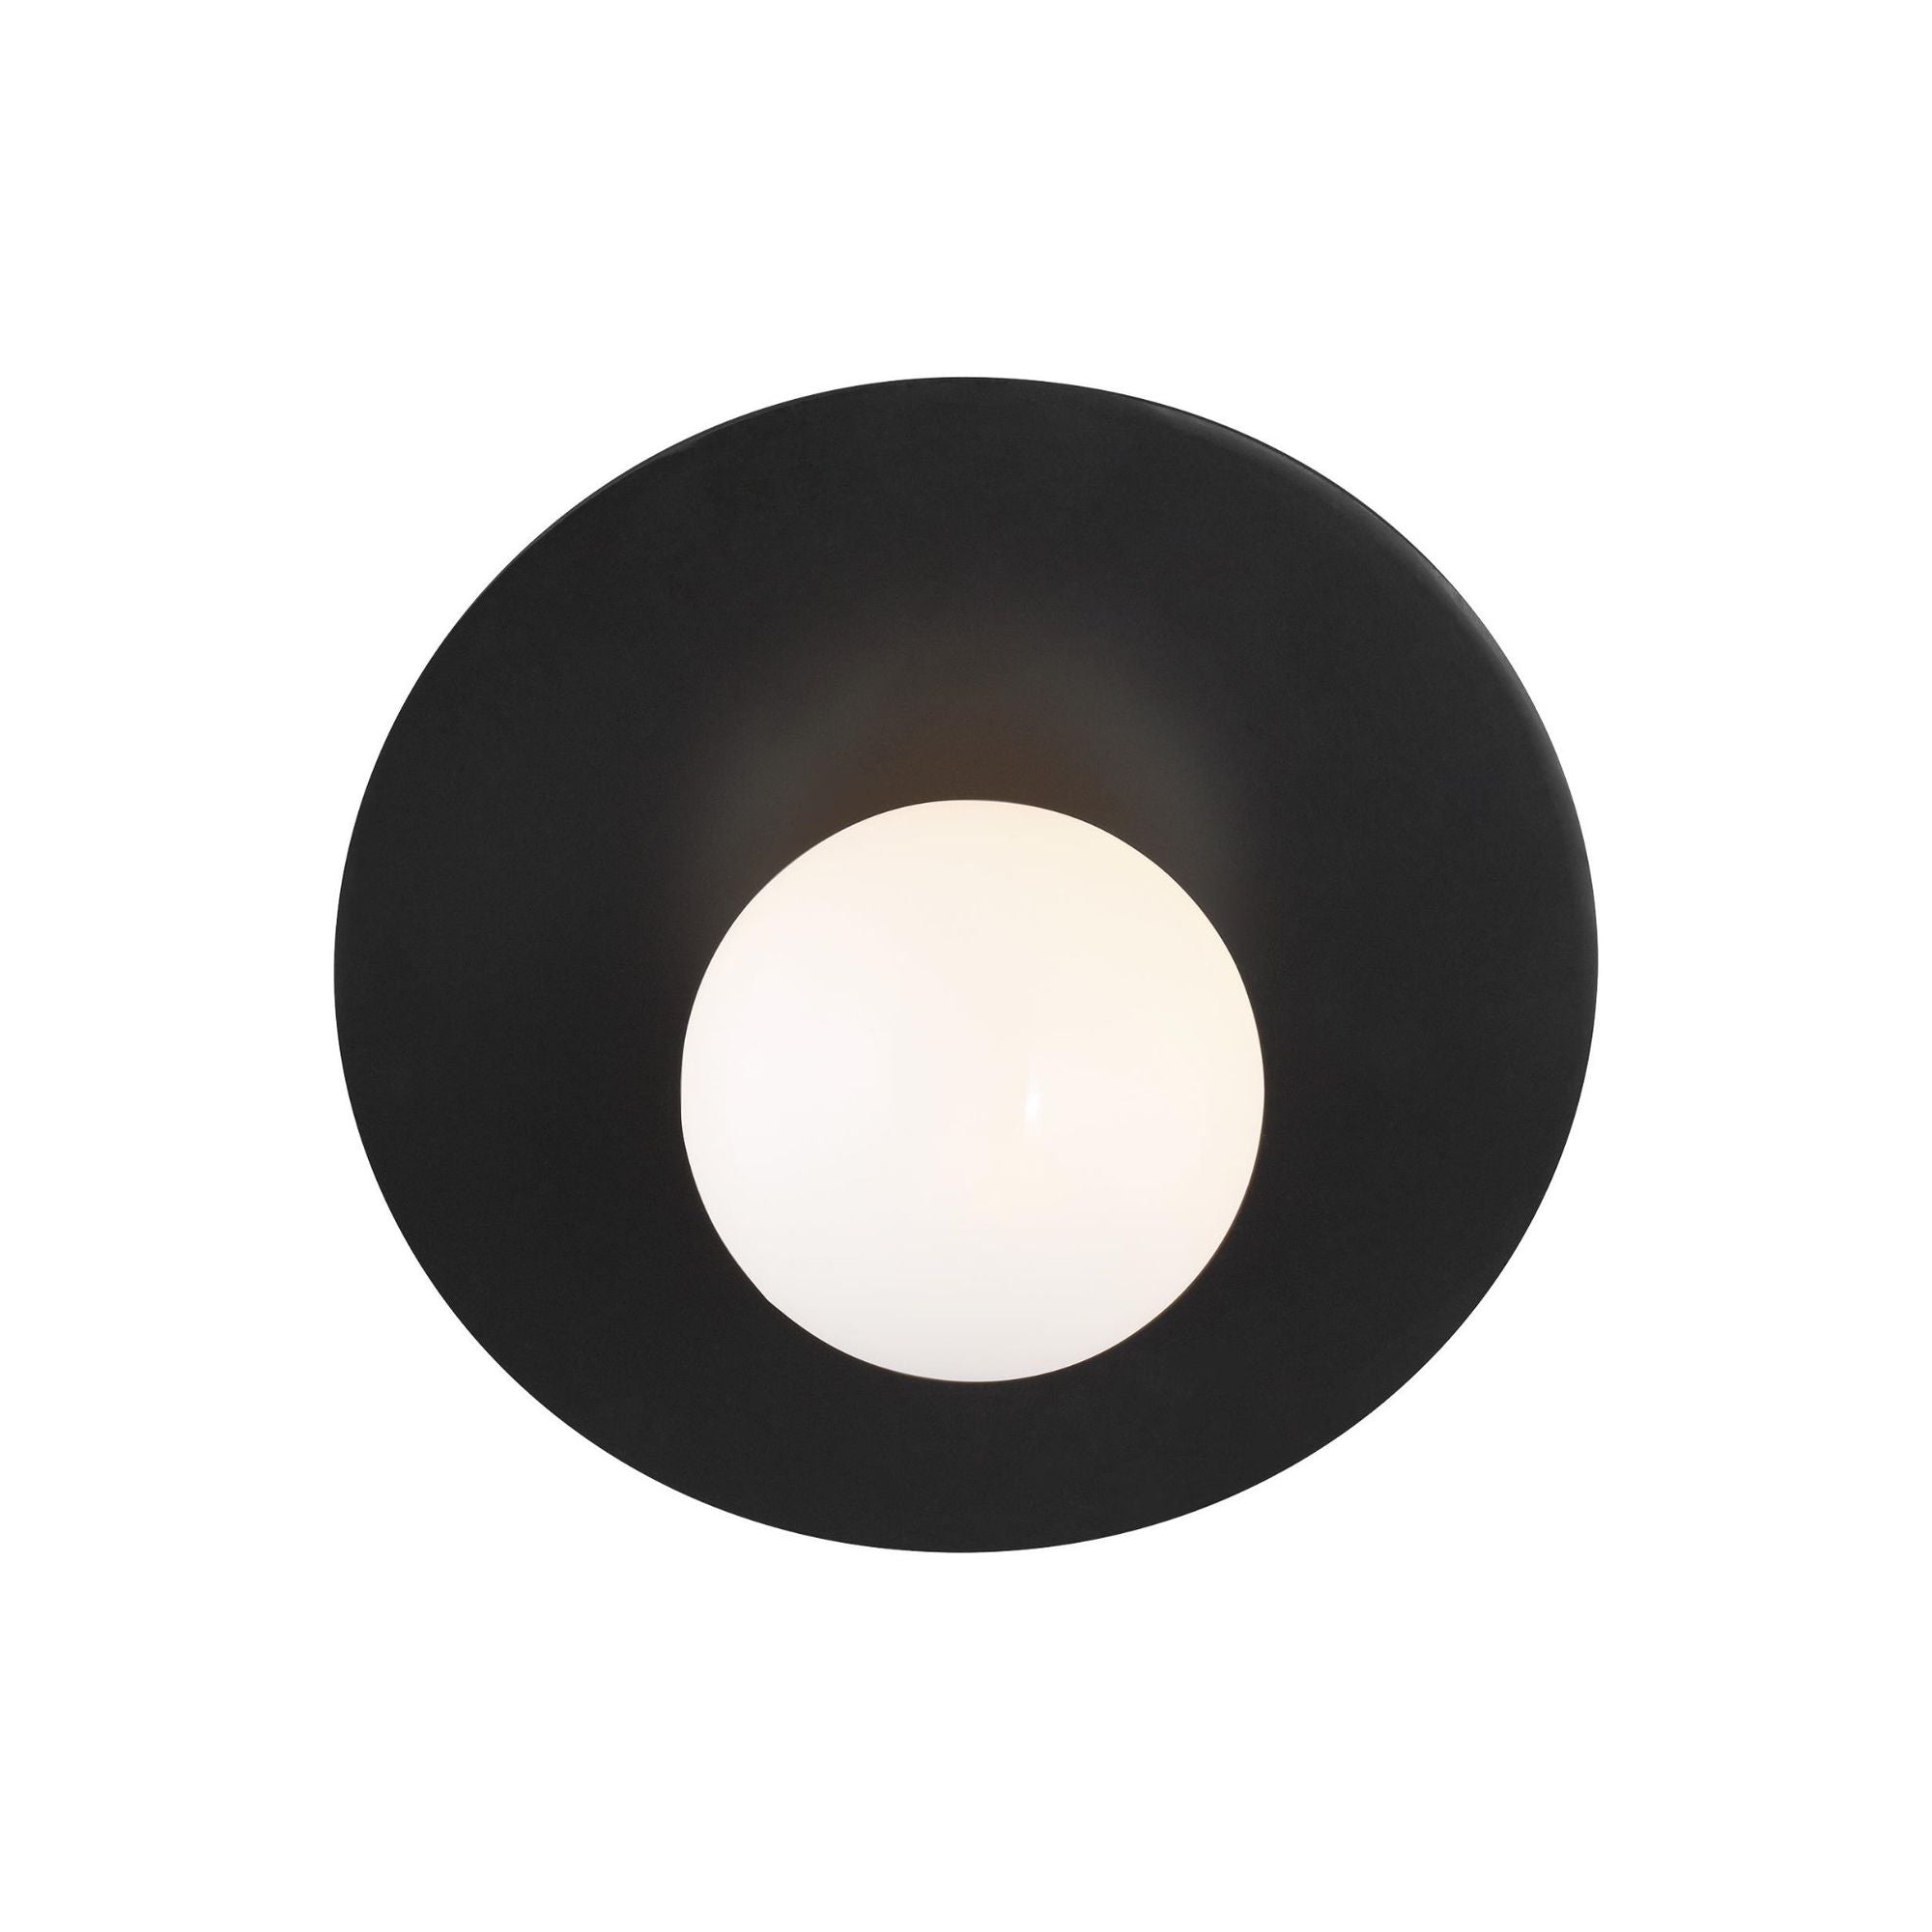 Kelly Wearstler Nodes Large Angled Sconce in Midnight Black